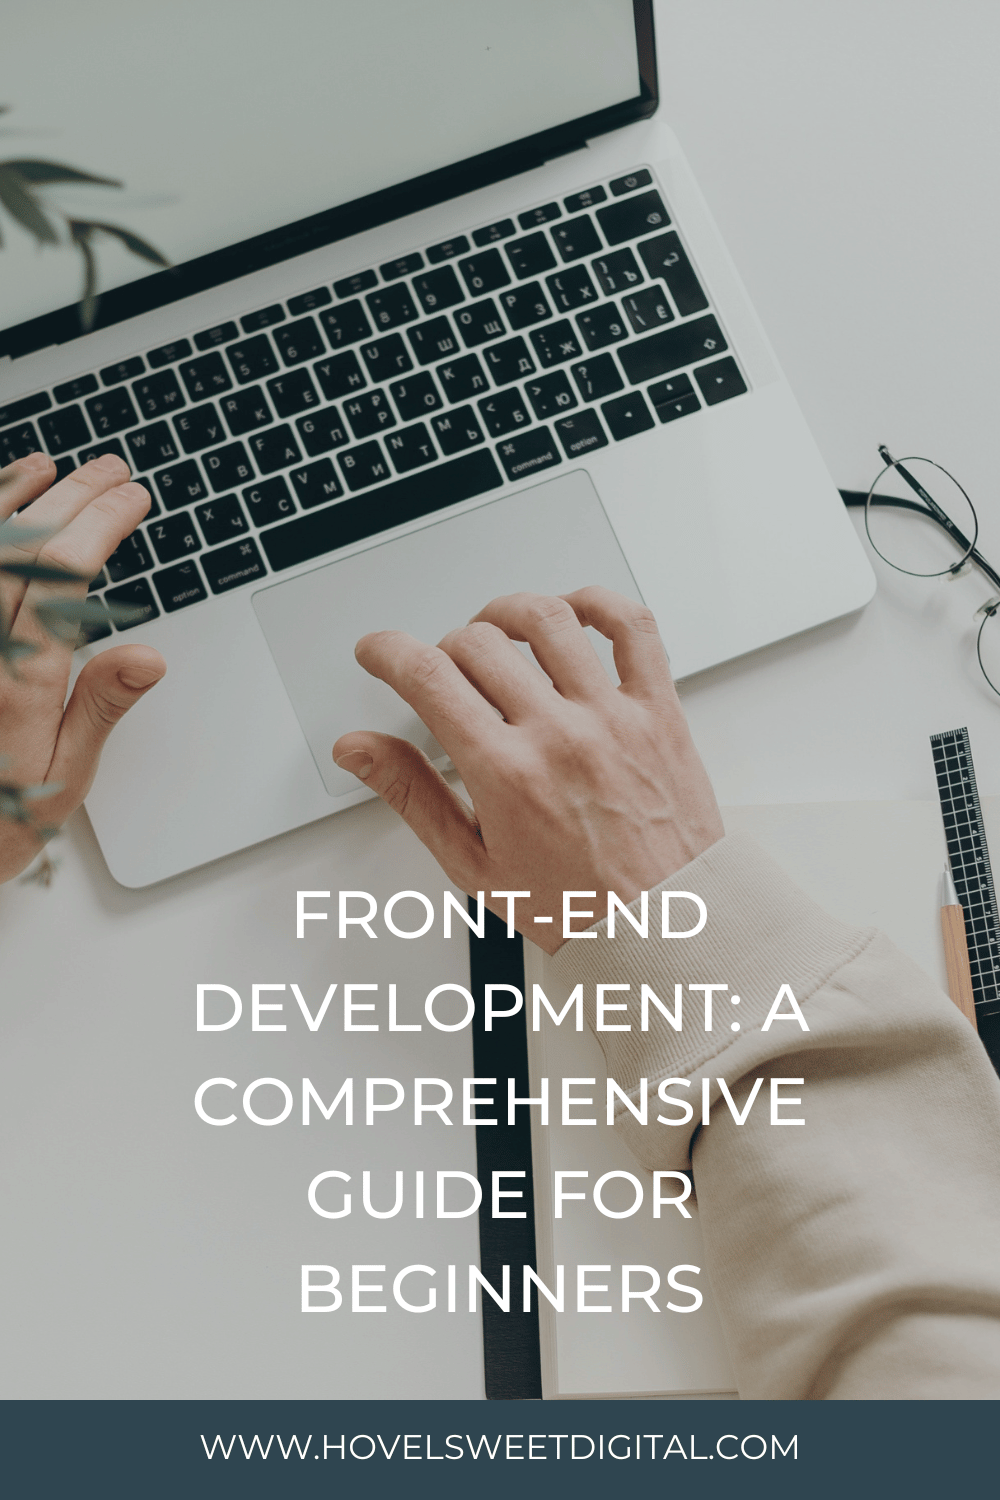 Front-end Development: A Comprehensive Guide for Beginners